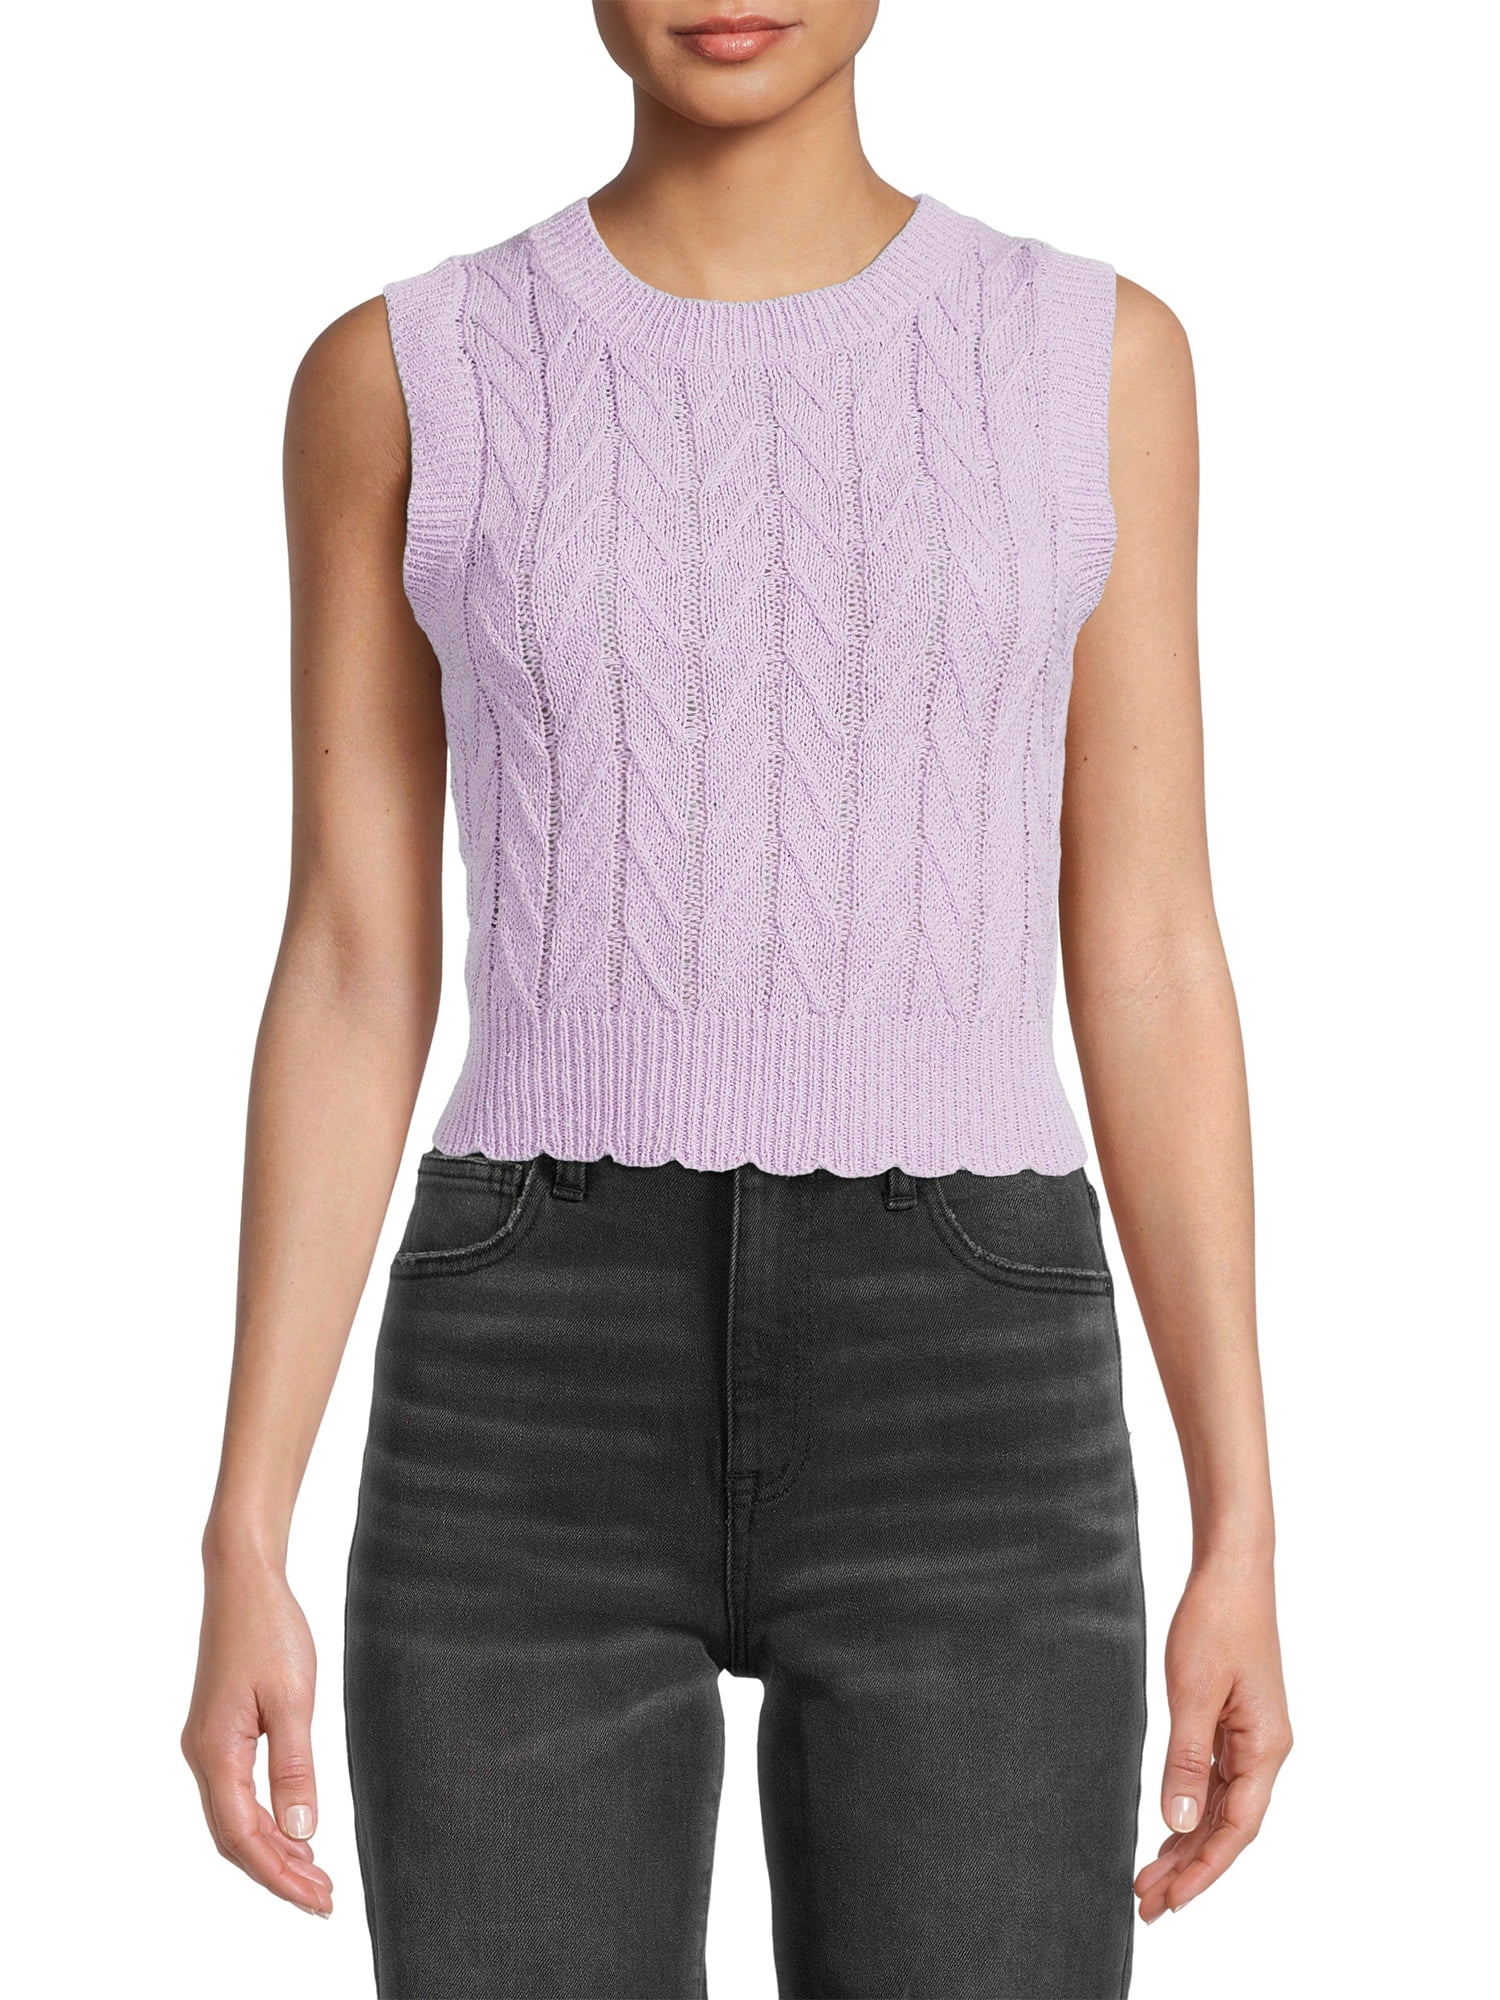 Dreamers By Debut Womens Sleeveless Sweater Vest